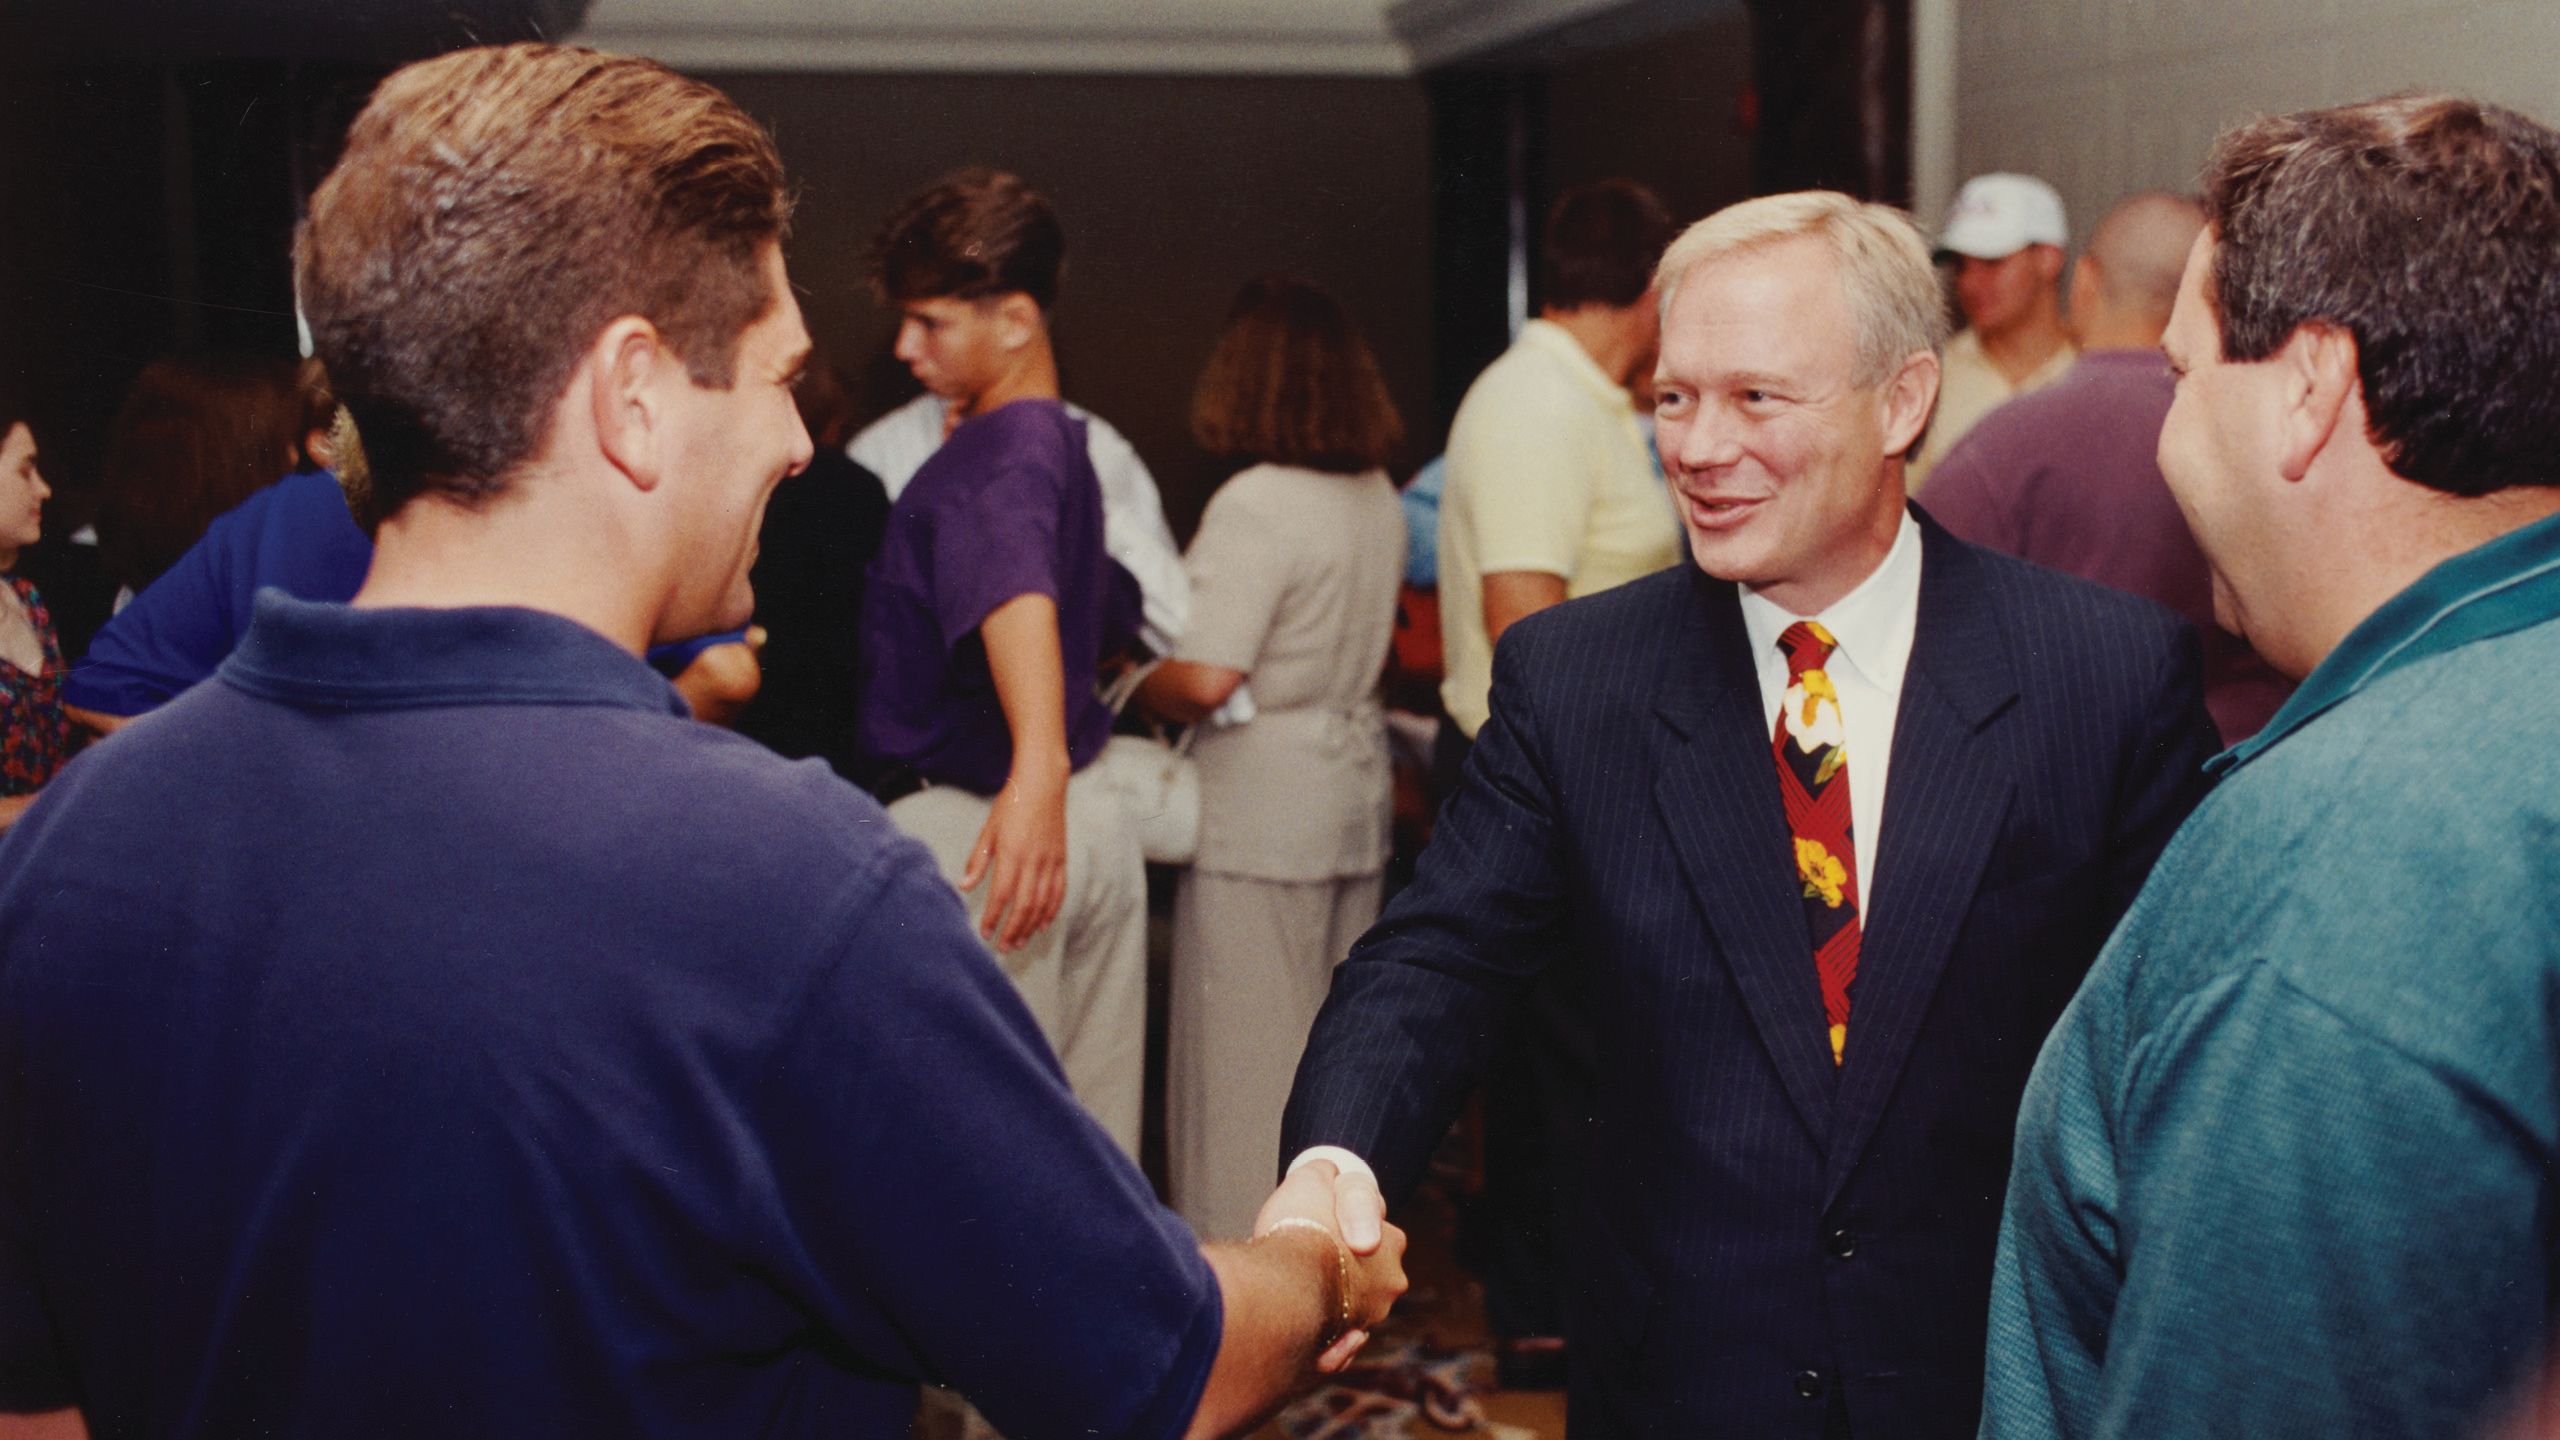 Dean David Dittman in a suit shaking hands.